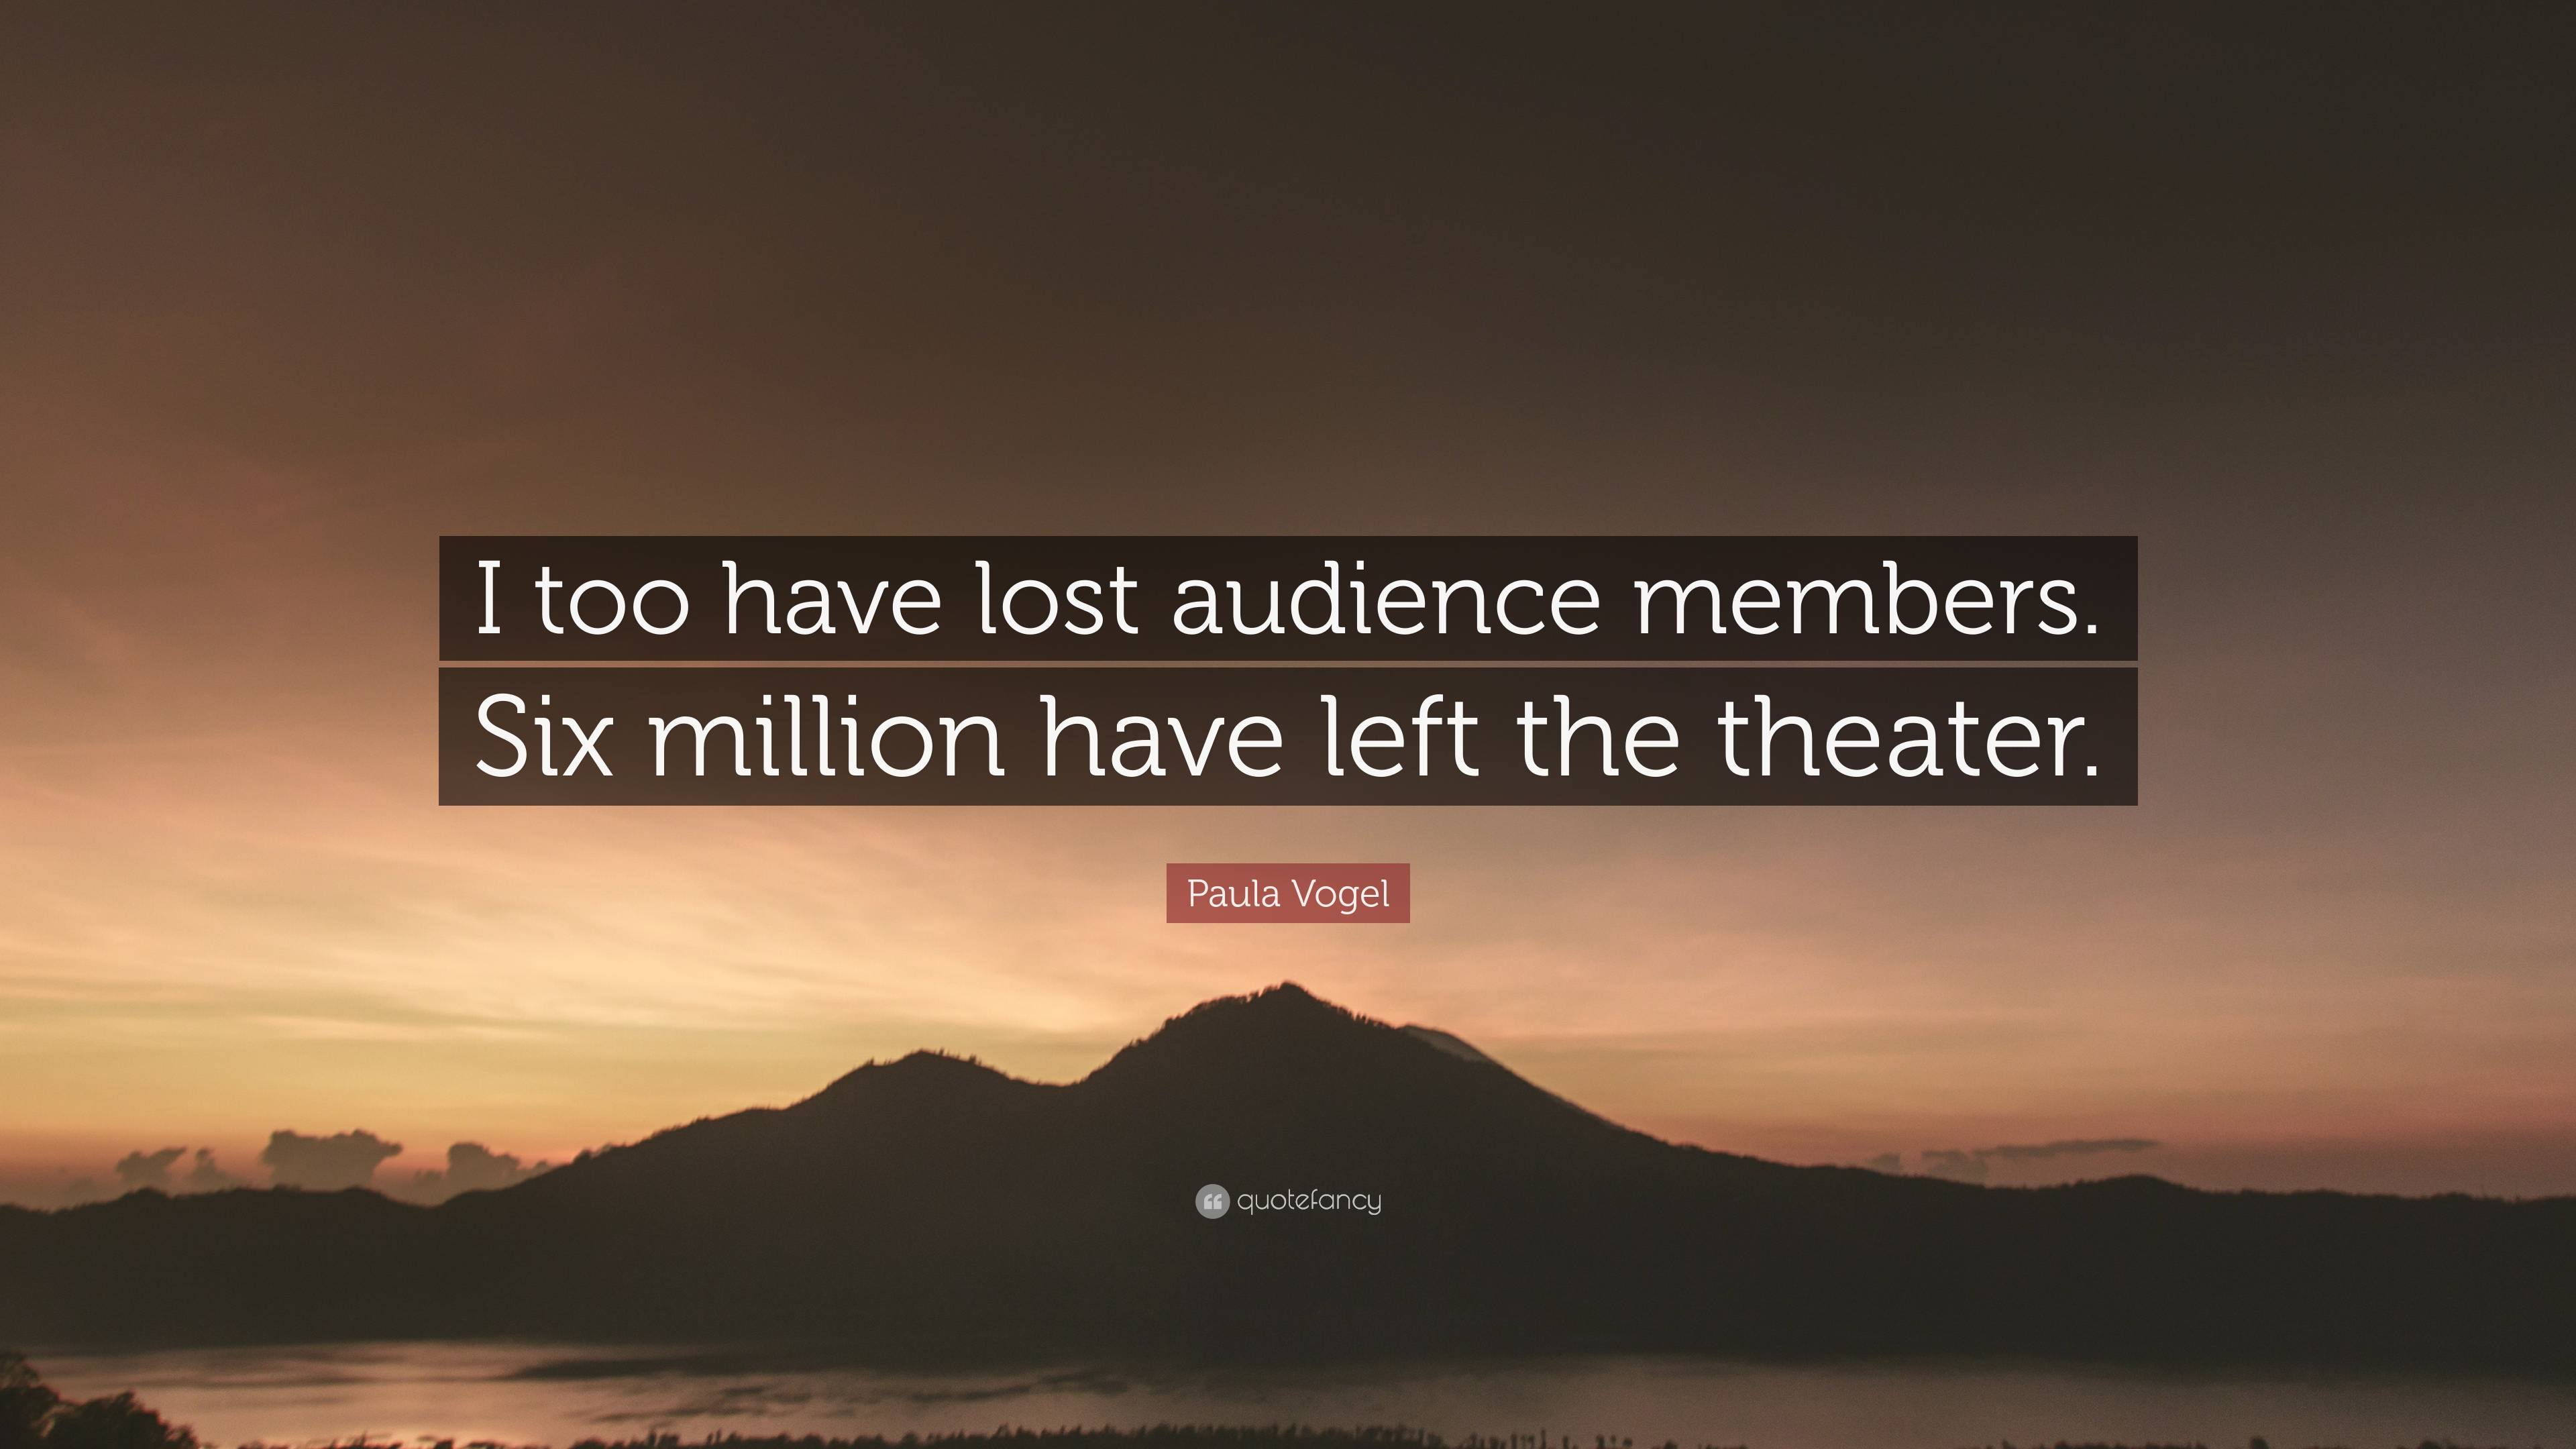 Paula Vogel Quote: “I too have lost audience members. Six million have ...